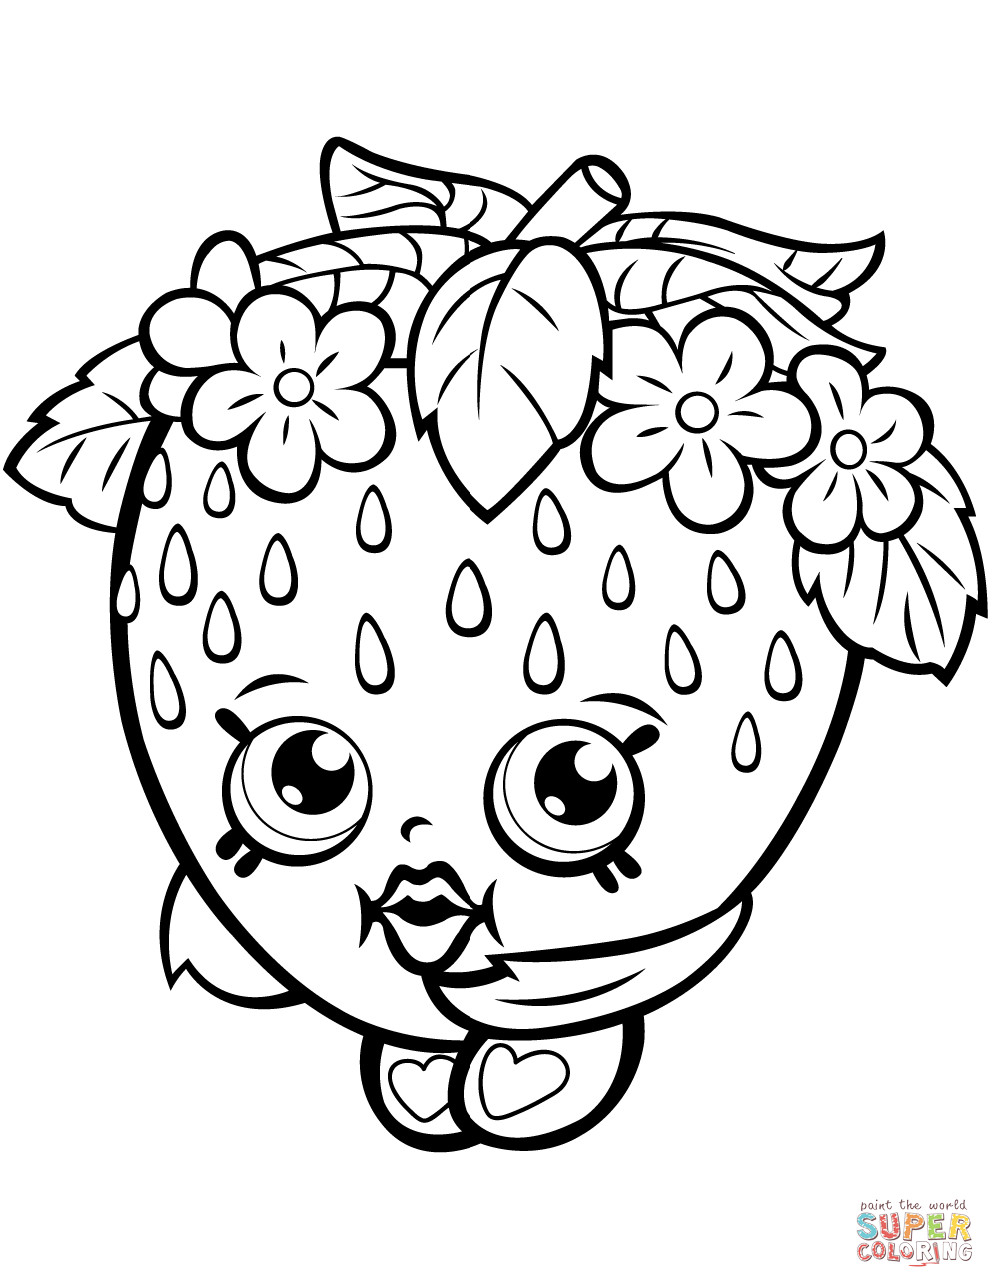 Printable Shopkin Coloring Pages
 Strawberry Kiss Shopkin coloring page